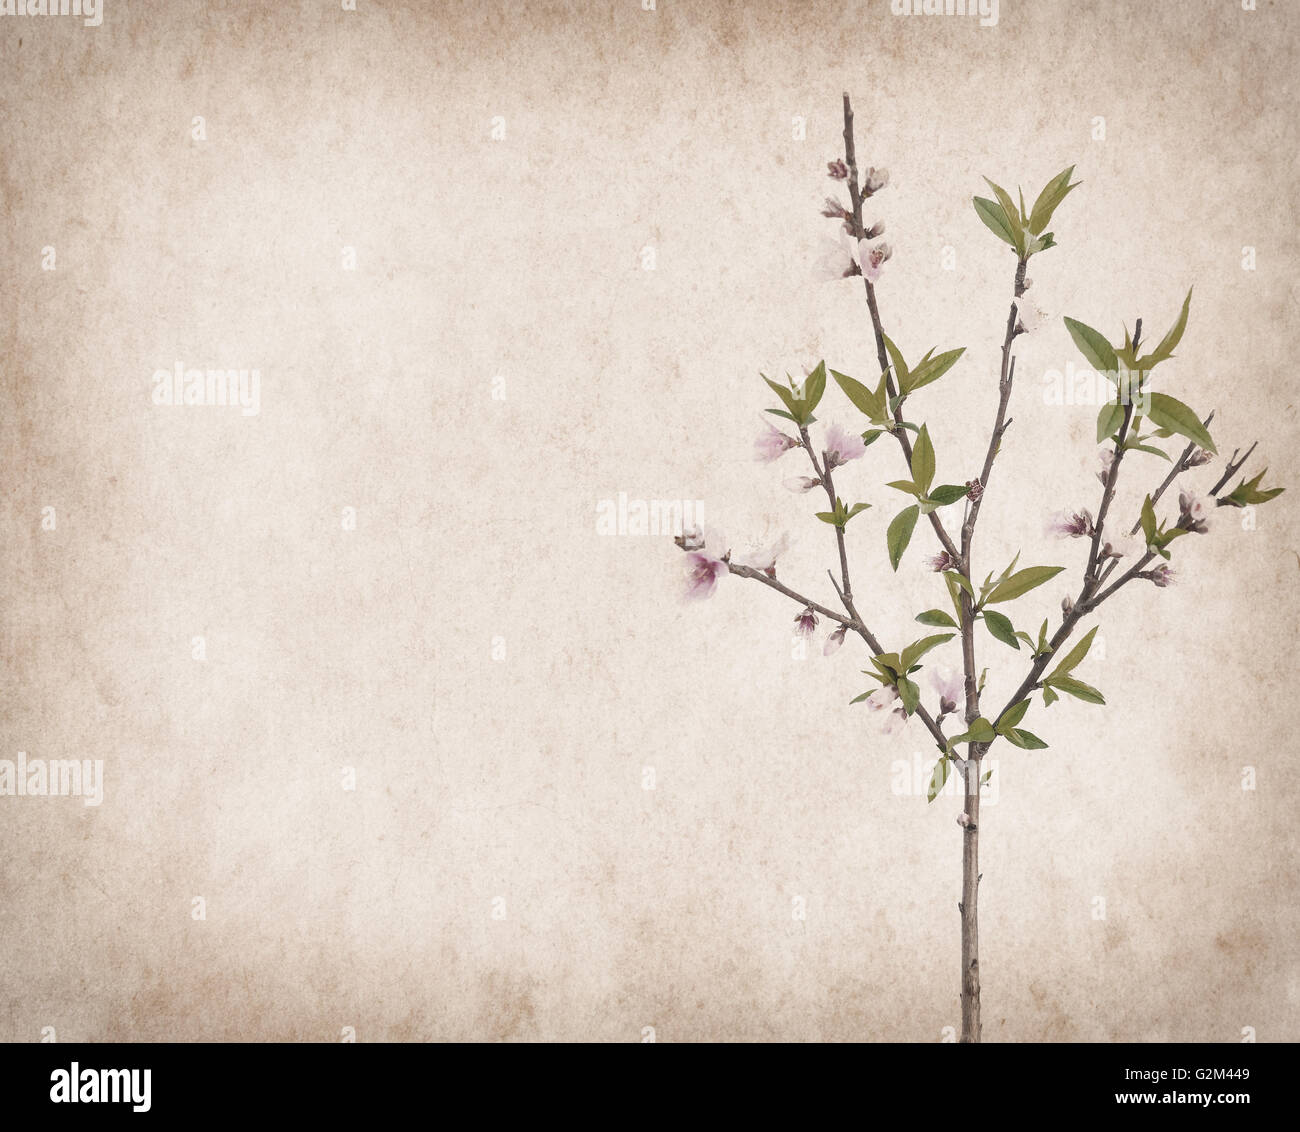 plum blossom on old antique vintage paper background Stock Photo